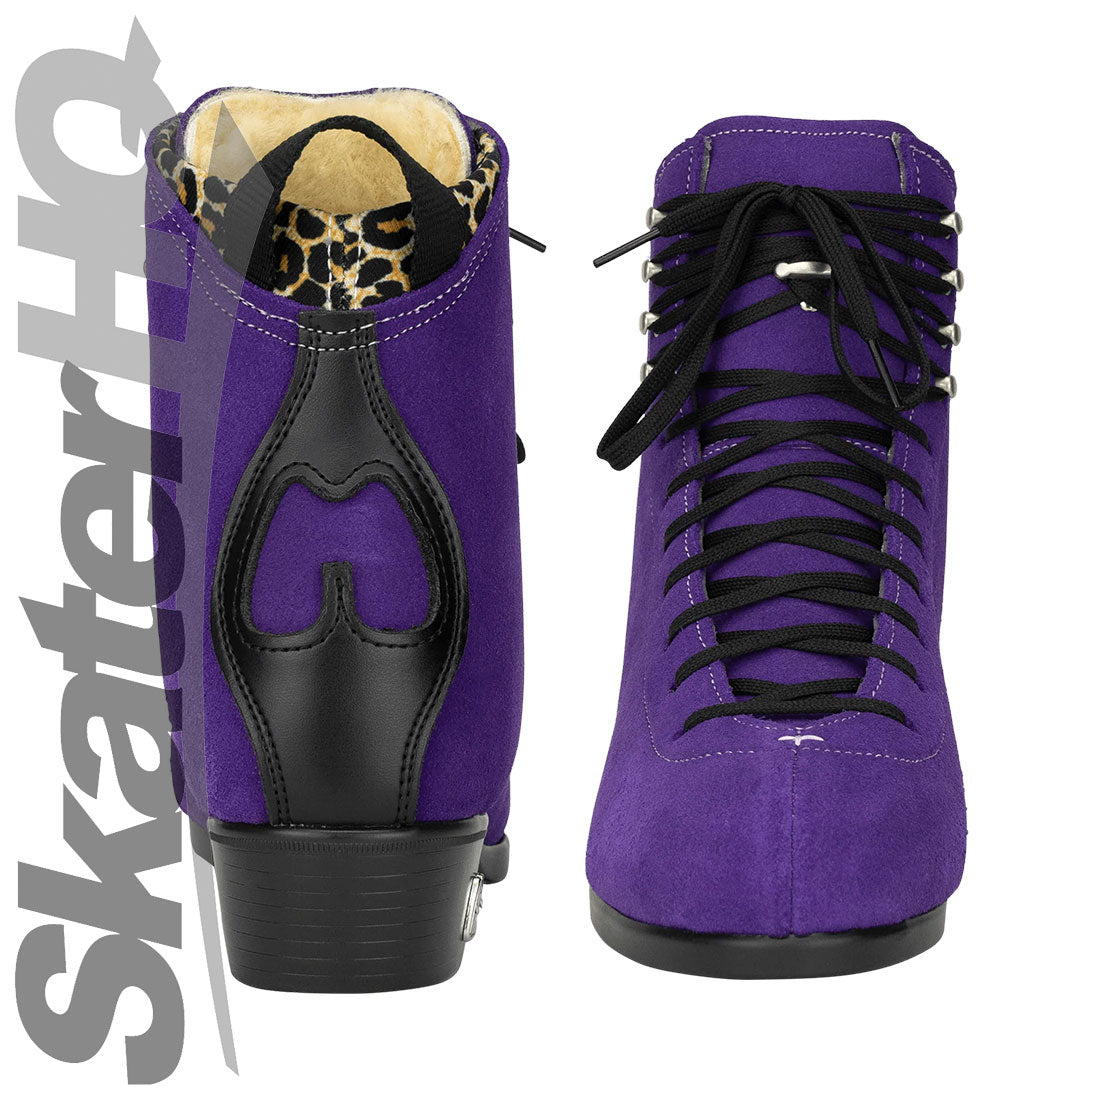 Moxi Jack 2 Boot - Special - Taffy Purple Roller Skate Boots